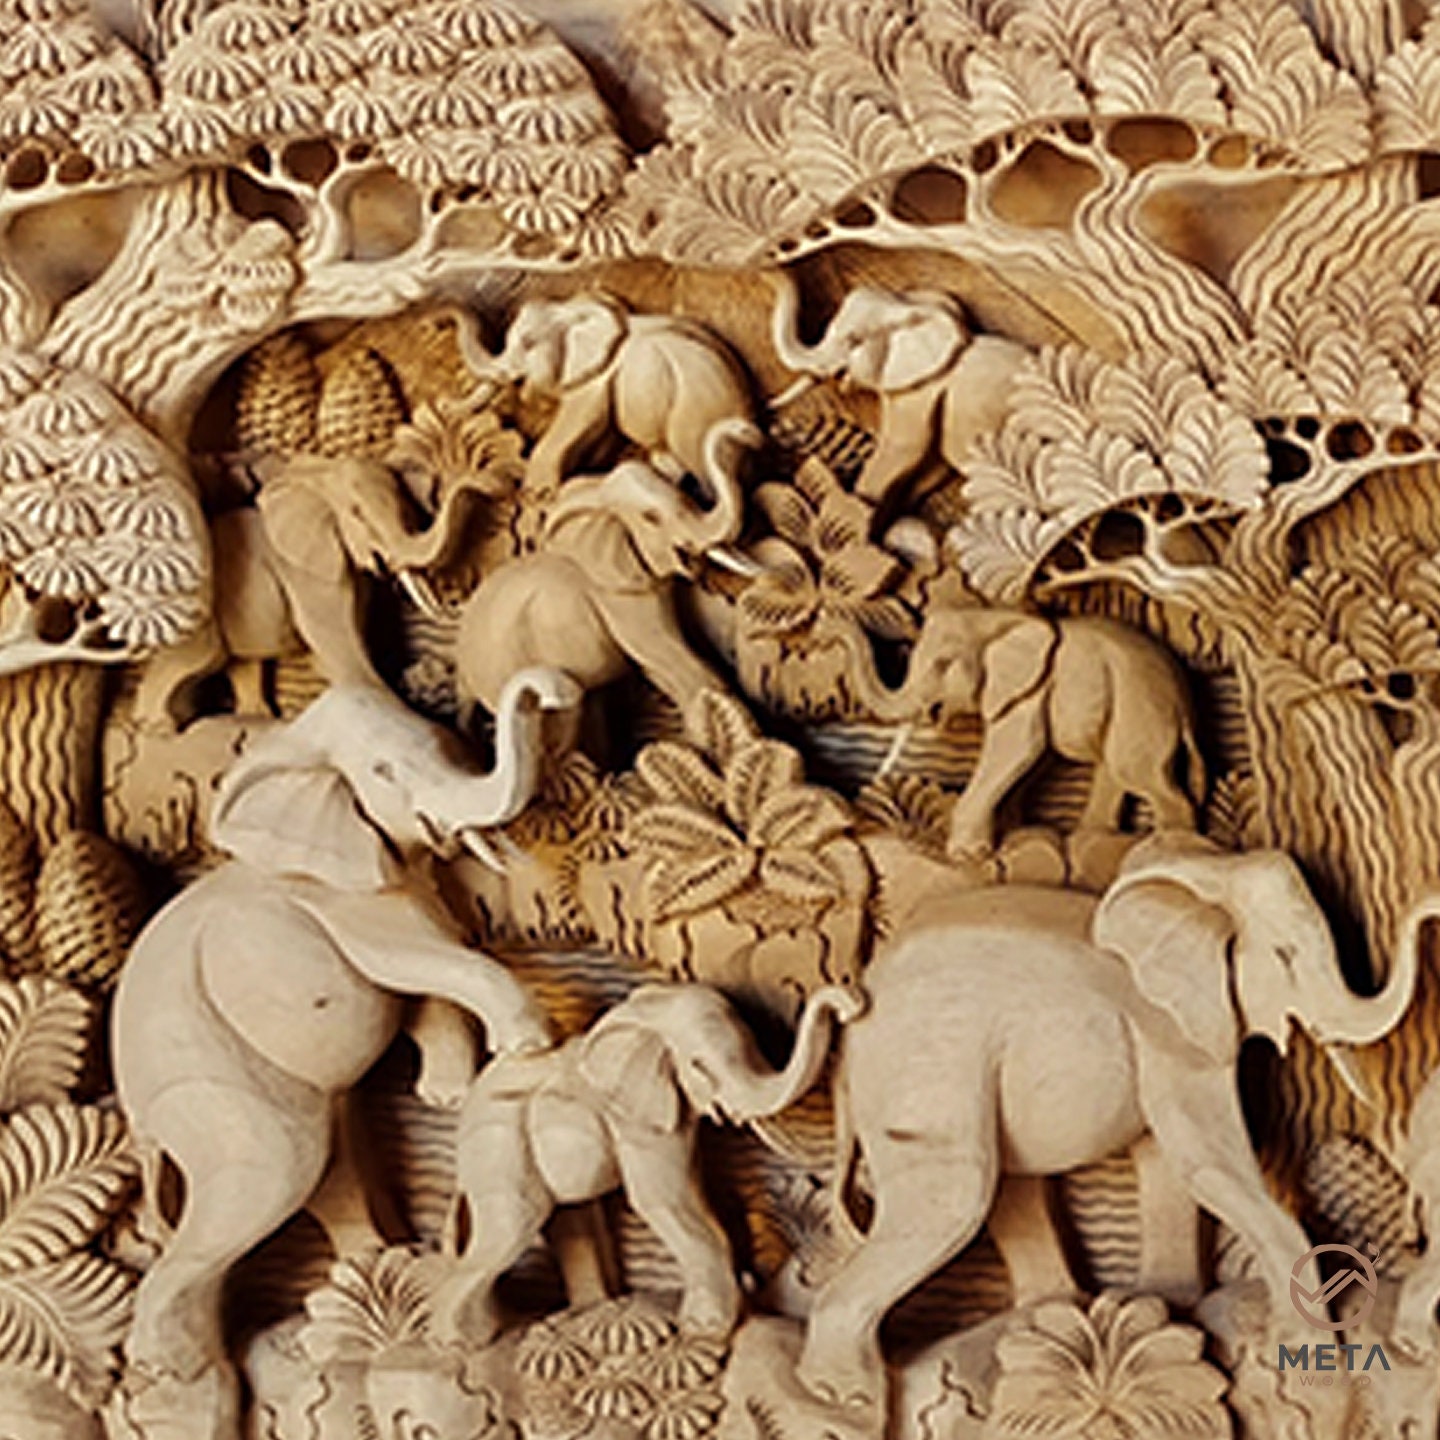 Large Handmade Relief Carving Tropical Home Decor